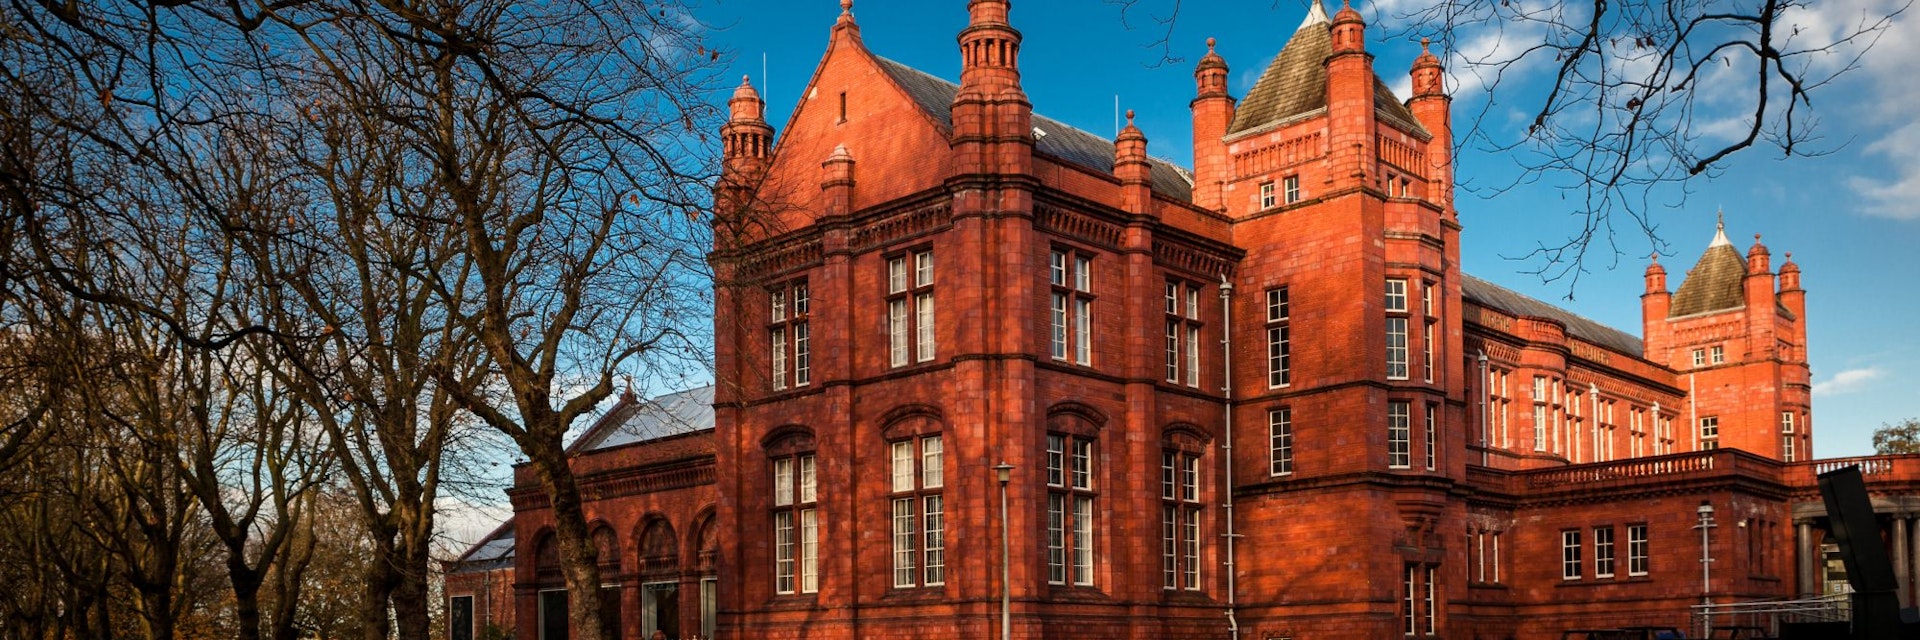 The Whitworth Art Gallery is an art gallery in Manchester, England, containing about 55,000 items in its collection.